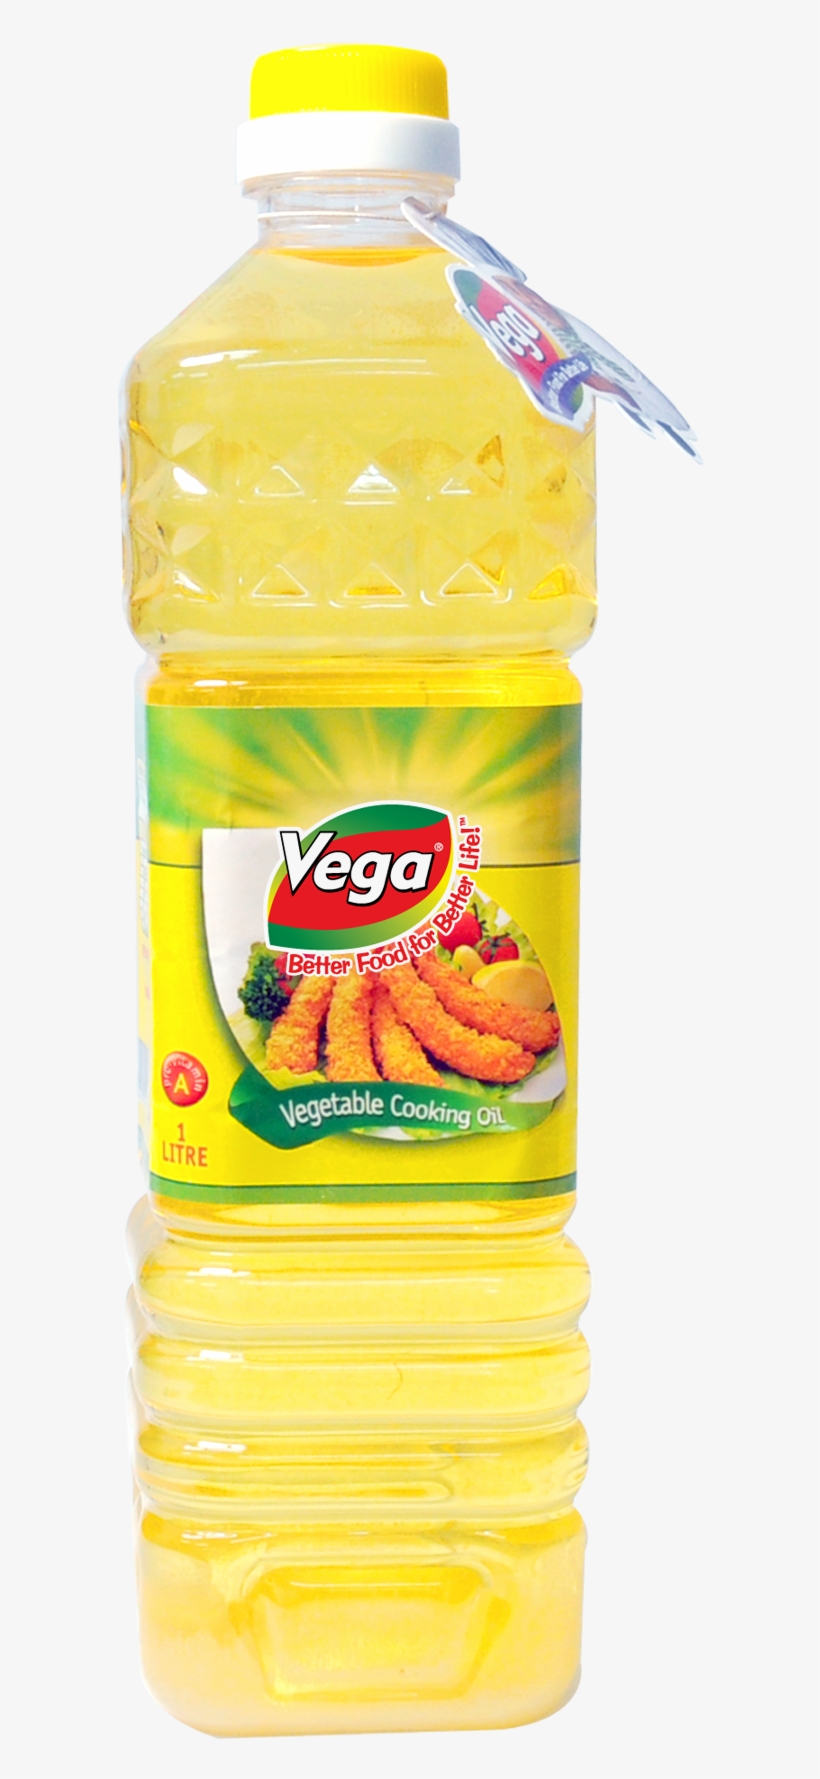 Affordable Cooking Oil In Pure Golden Colour - Vega Foods, transparent png #5983545